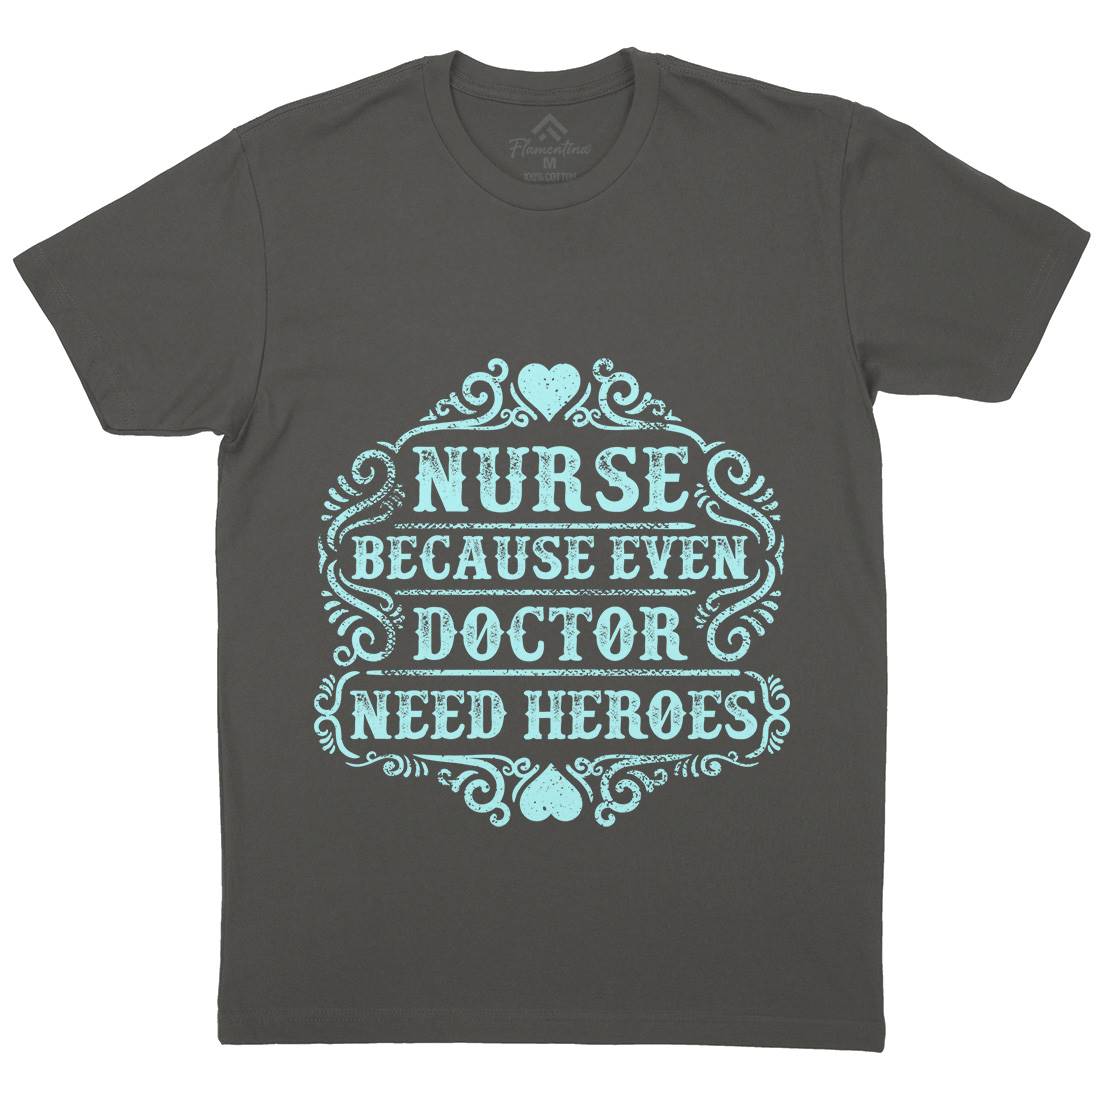 Nurse Because Even Doctor Need Heroes Mens Crew Neck T-Shirt Work C969